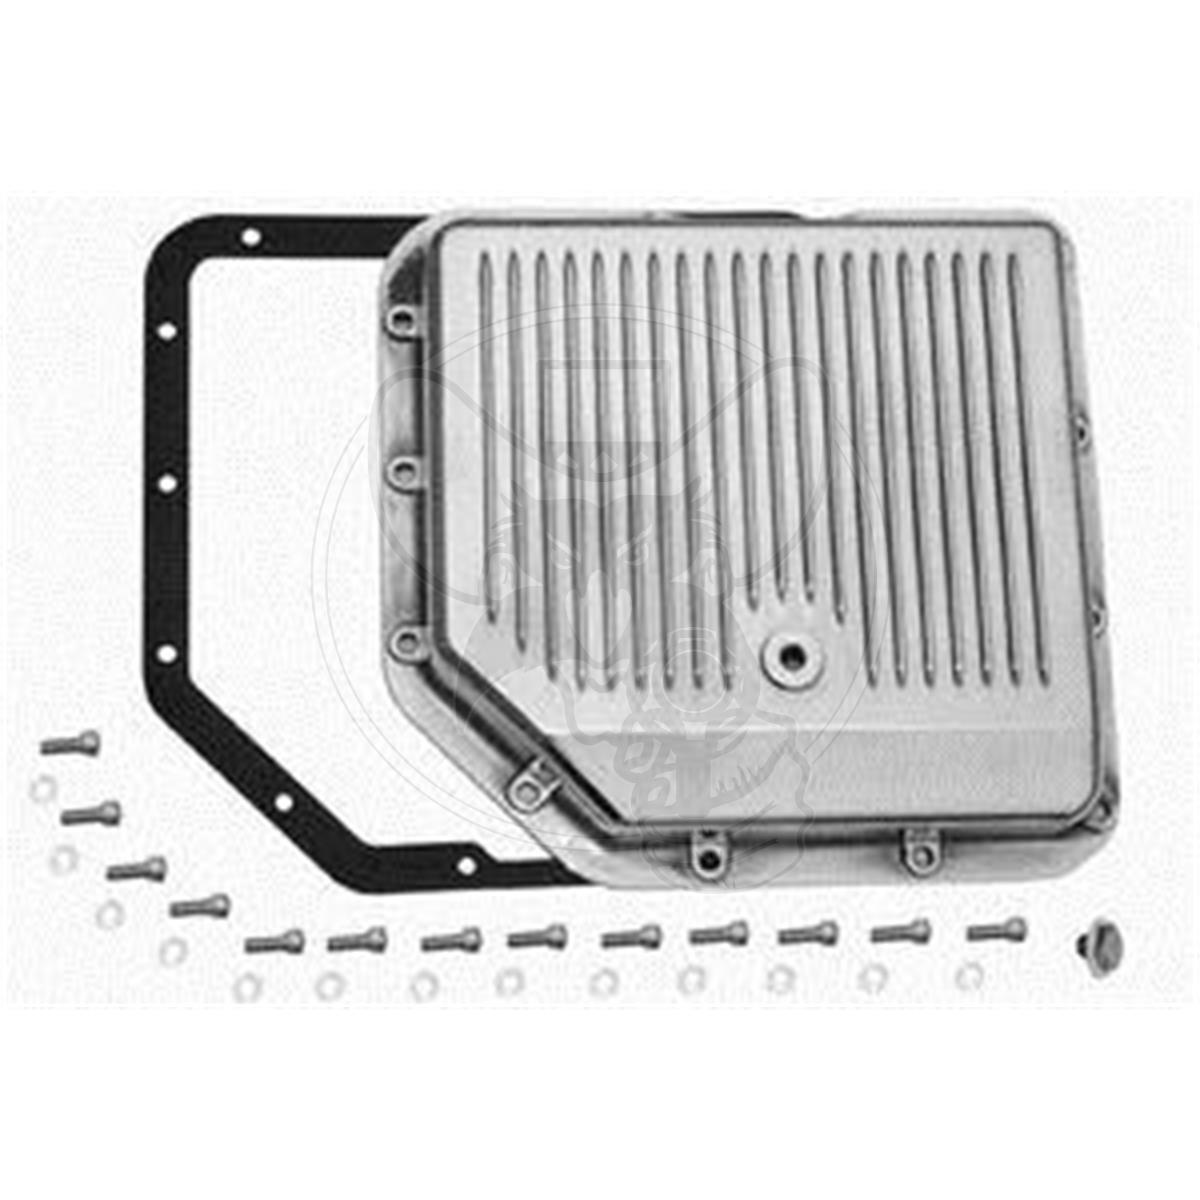 RPC TRANSMISSION PAN POLISHED FINNED ALUM STOCK DEPTH FITS GM TH350